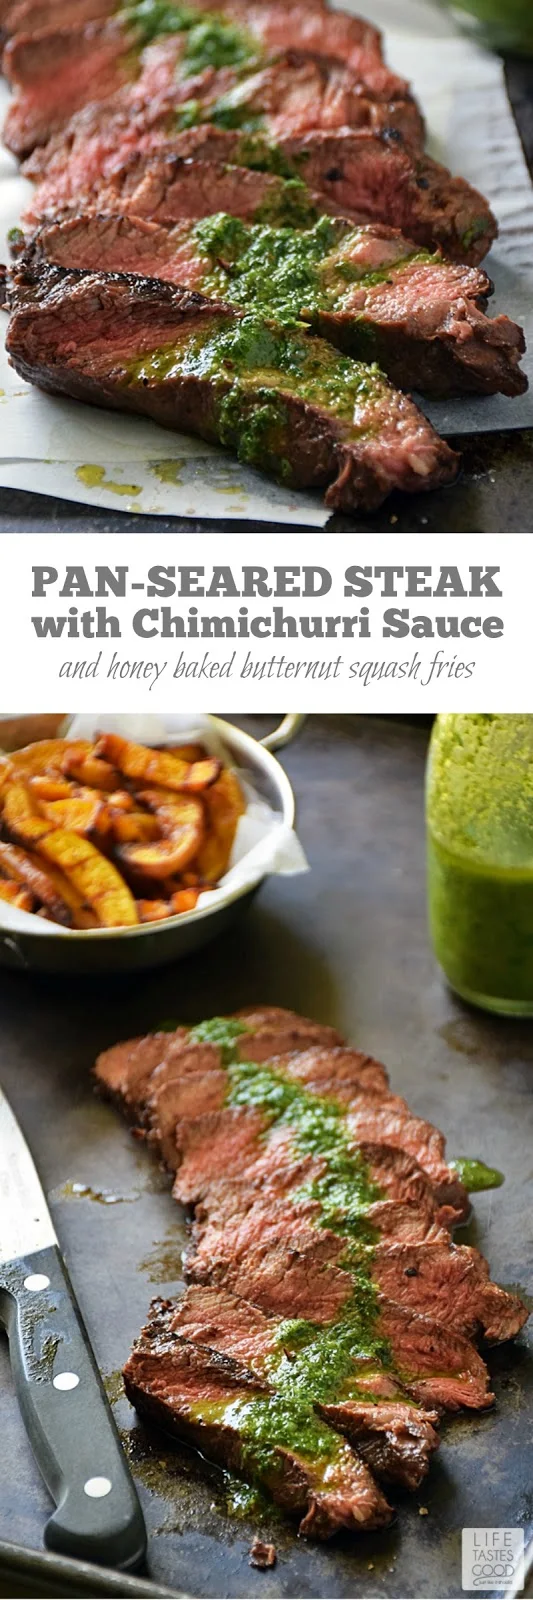 Pan-Seared Steak with Chimichurri sauce | by Life Tastes Good is an easy to make dinner any night of the week! Flat-iron steak is one of the most flavorful cuts, and it is more budget-friendly than some other popular cuts, which makes it a great choice for #WeekdaySupper! #LTGrecipes